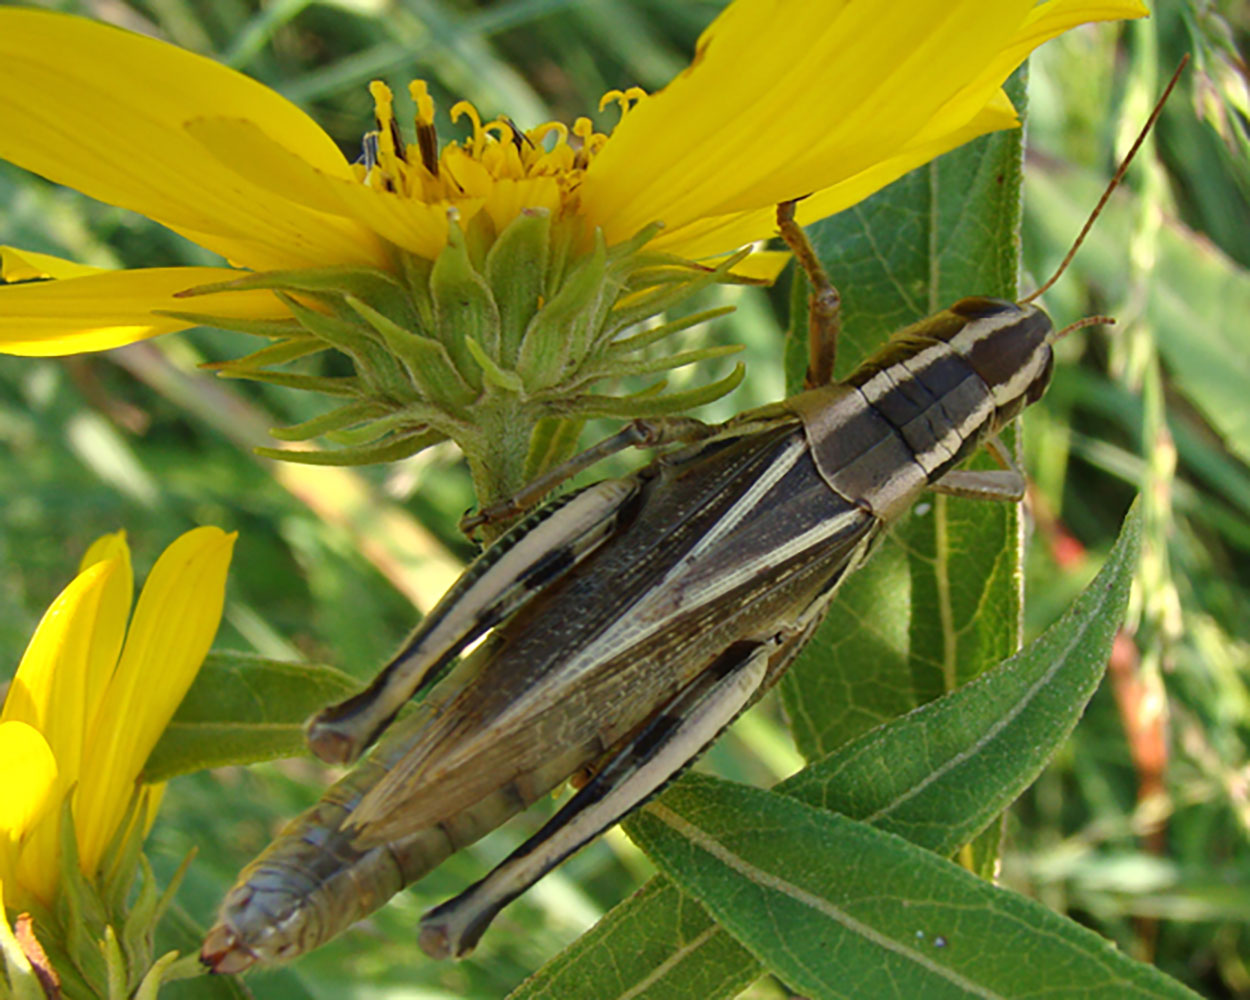 A grayish brown grasshopper with two light tan stripes along its head and back. The grasshopper is perched on a plant with a yellow flower.